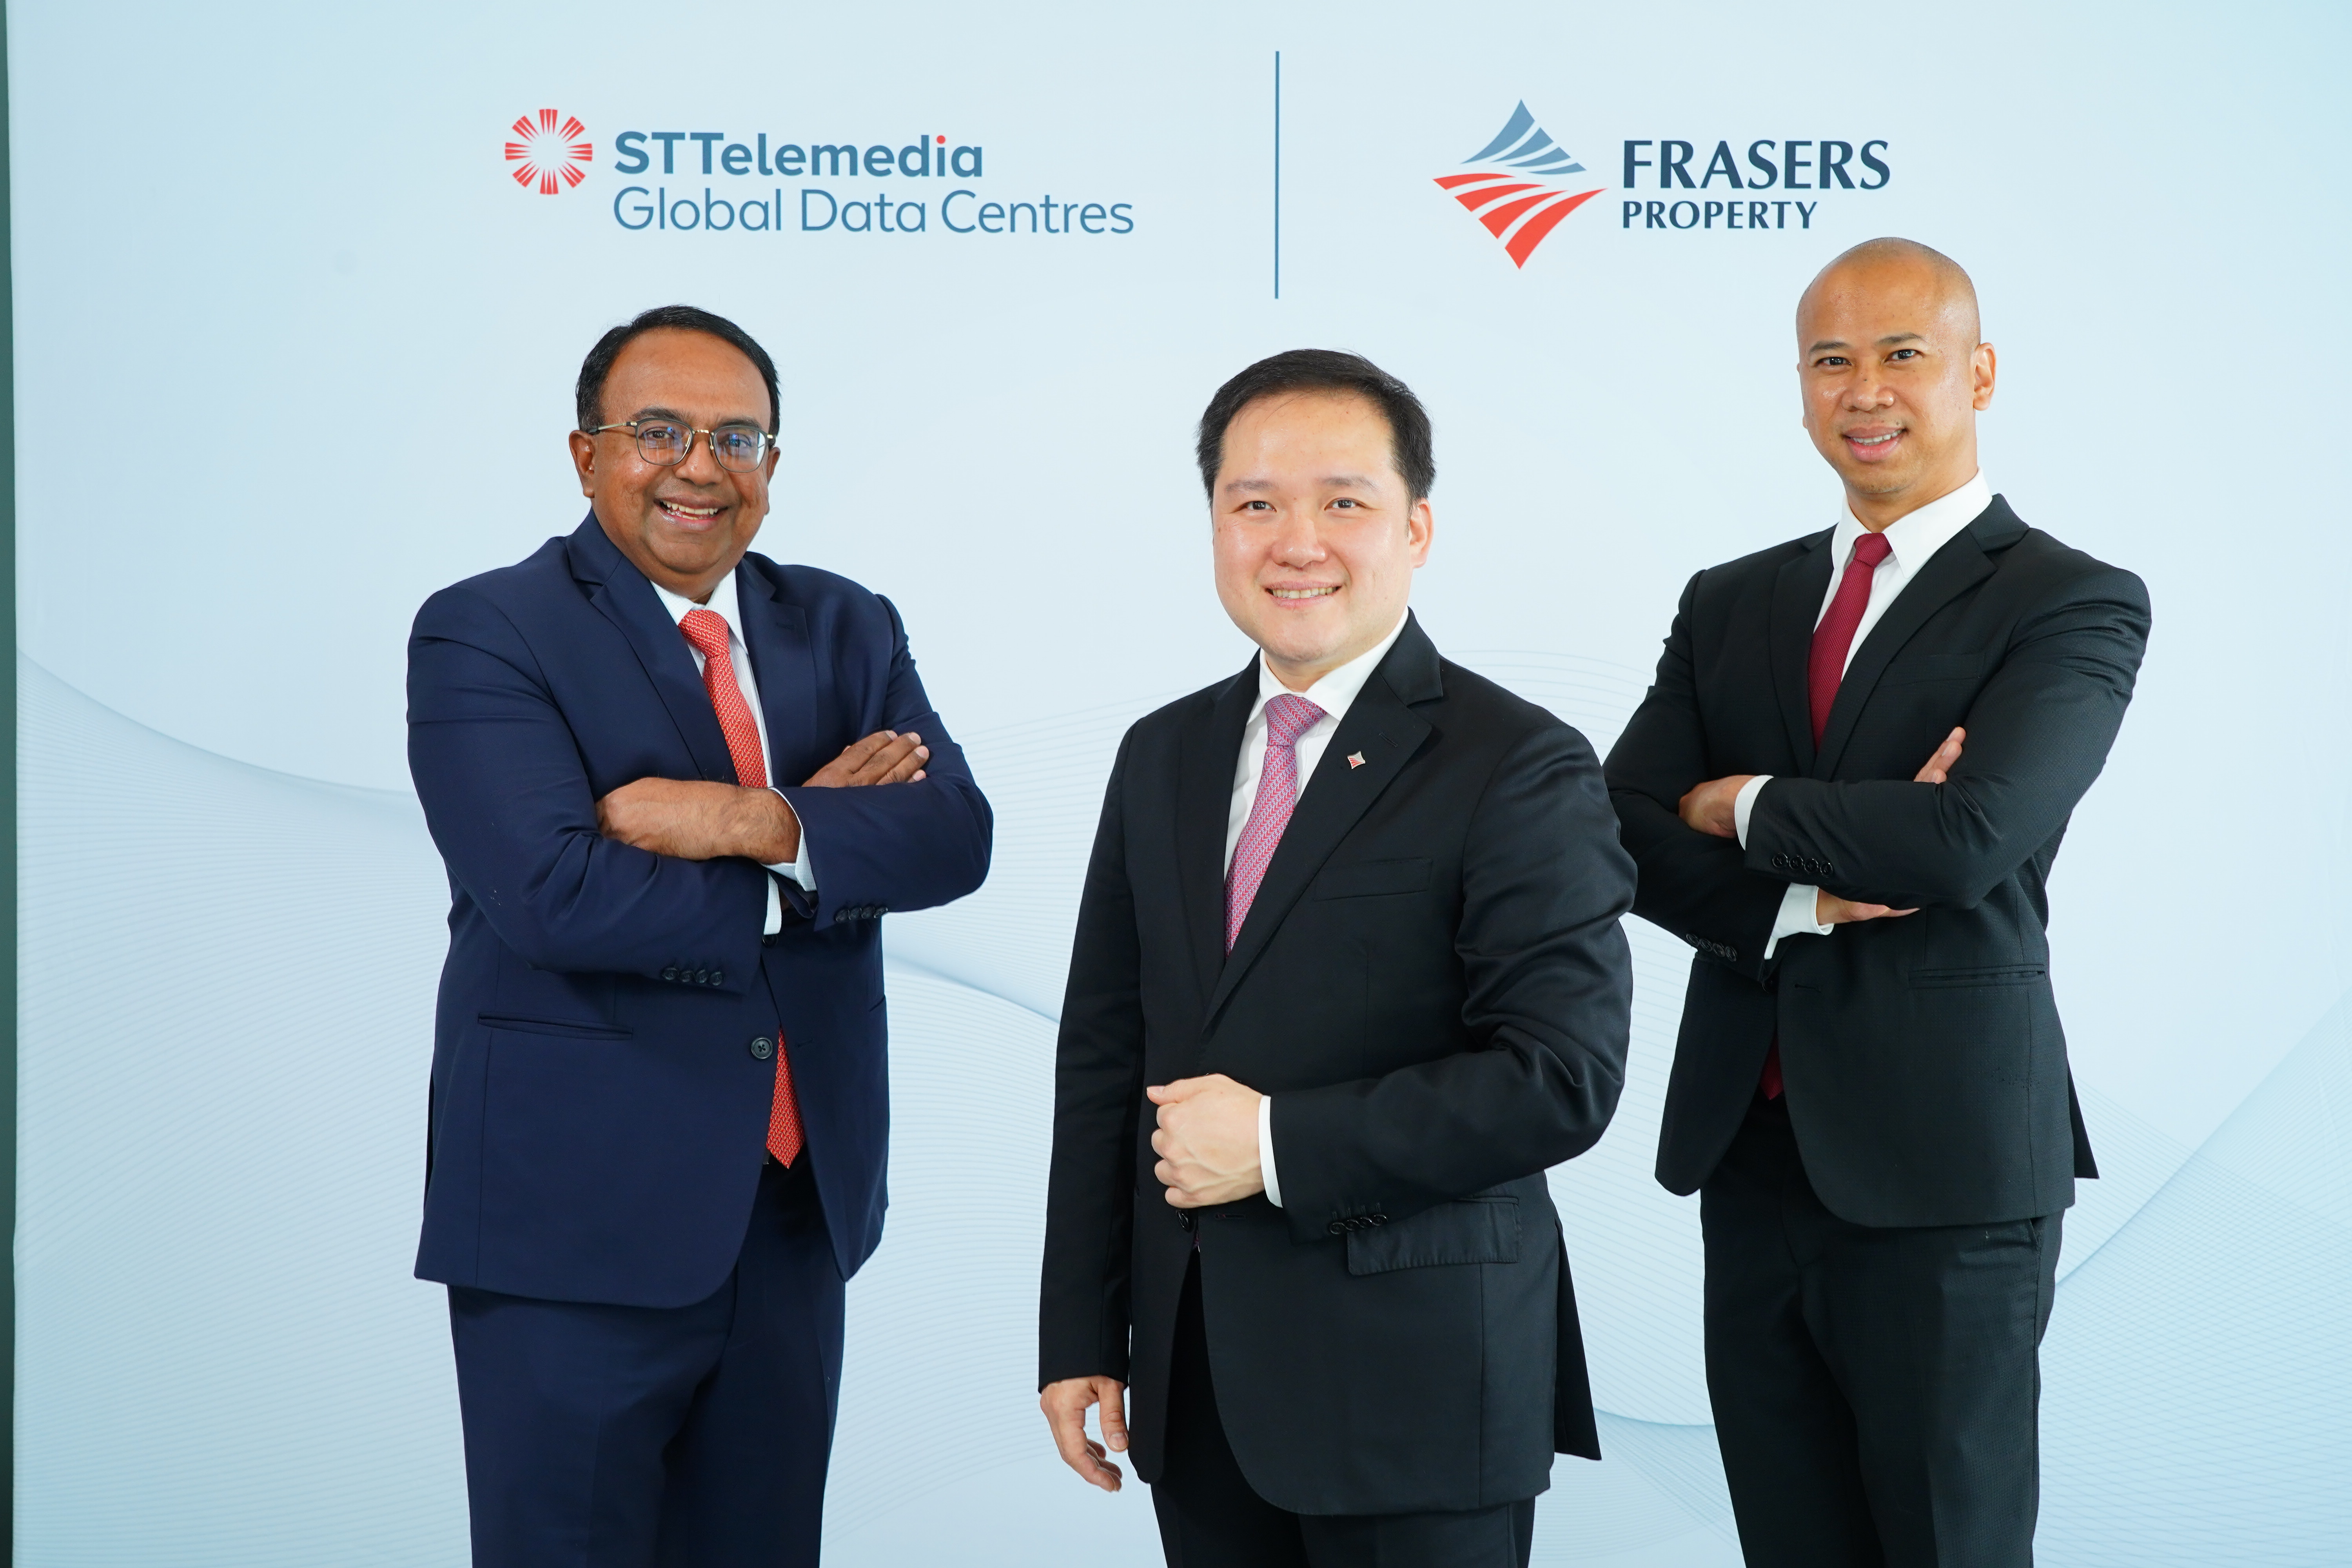 From left to right: Mr Bruno Lopez, President and Group CEO of ST Telemedia Global Data Centres, Mr Panote Sirivadhanabhakdi, Group CEO of Frasers Property Limited and Mr Supparat Sivapetchranat Singhara na Ayutthaya, CEO of ST Telemedia Global Data Centres (Thailand)